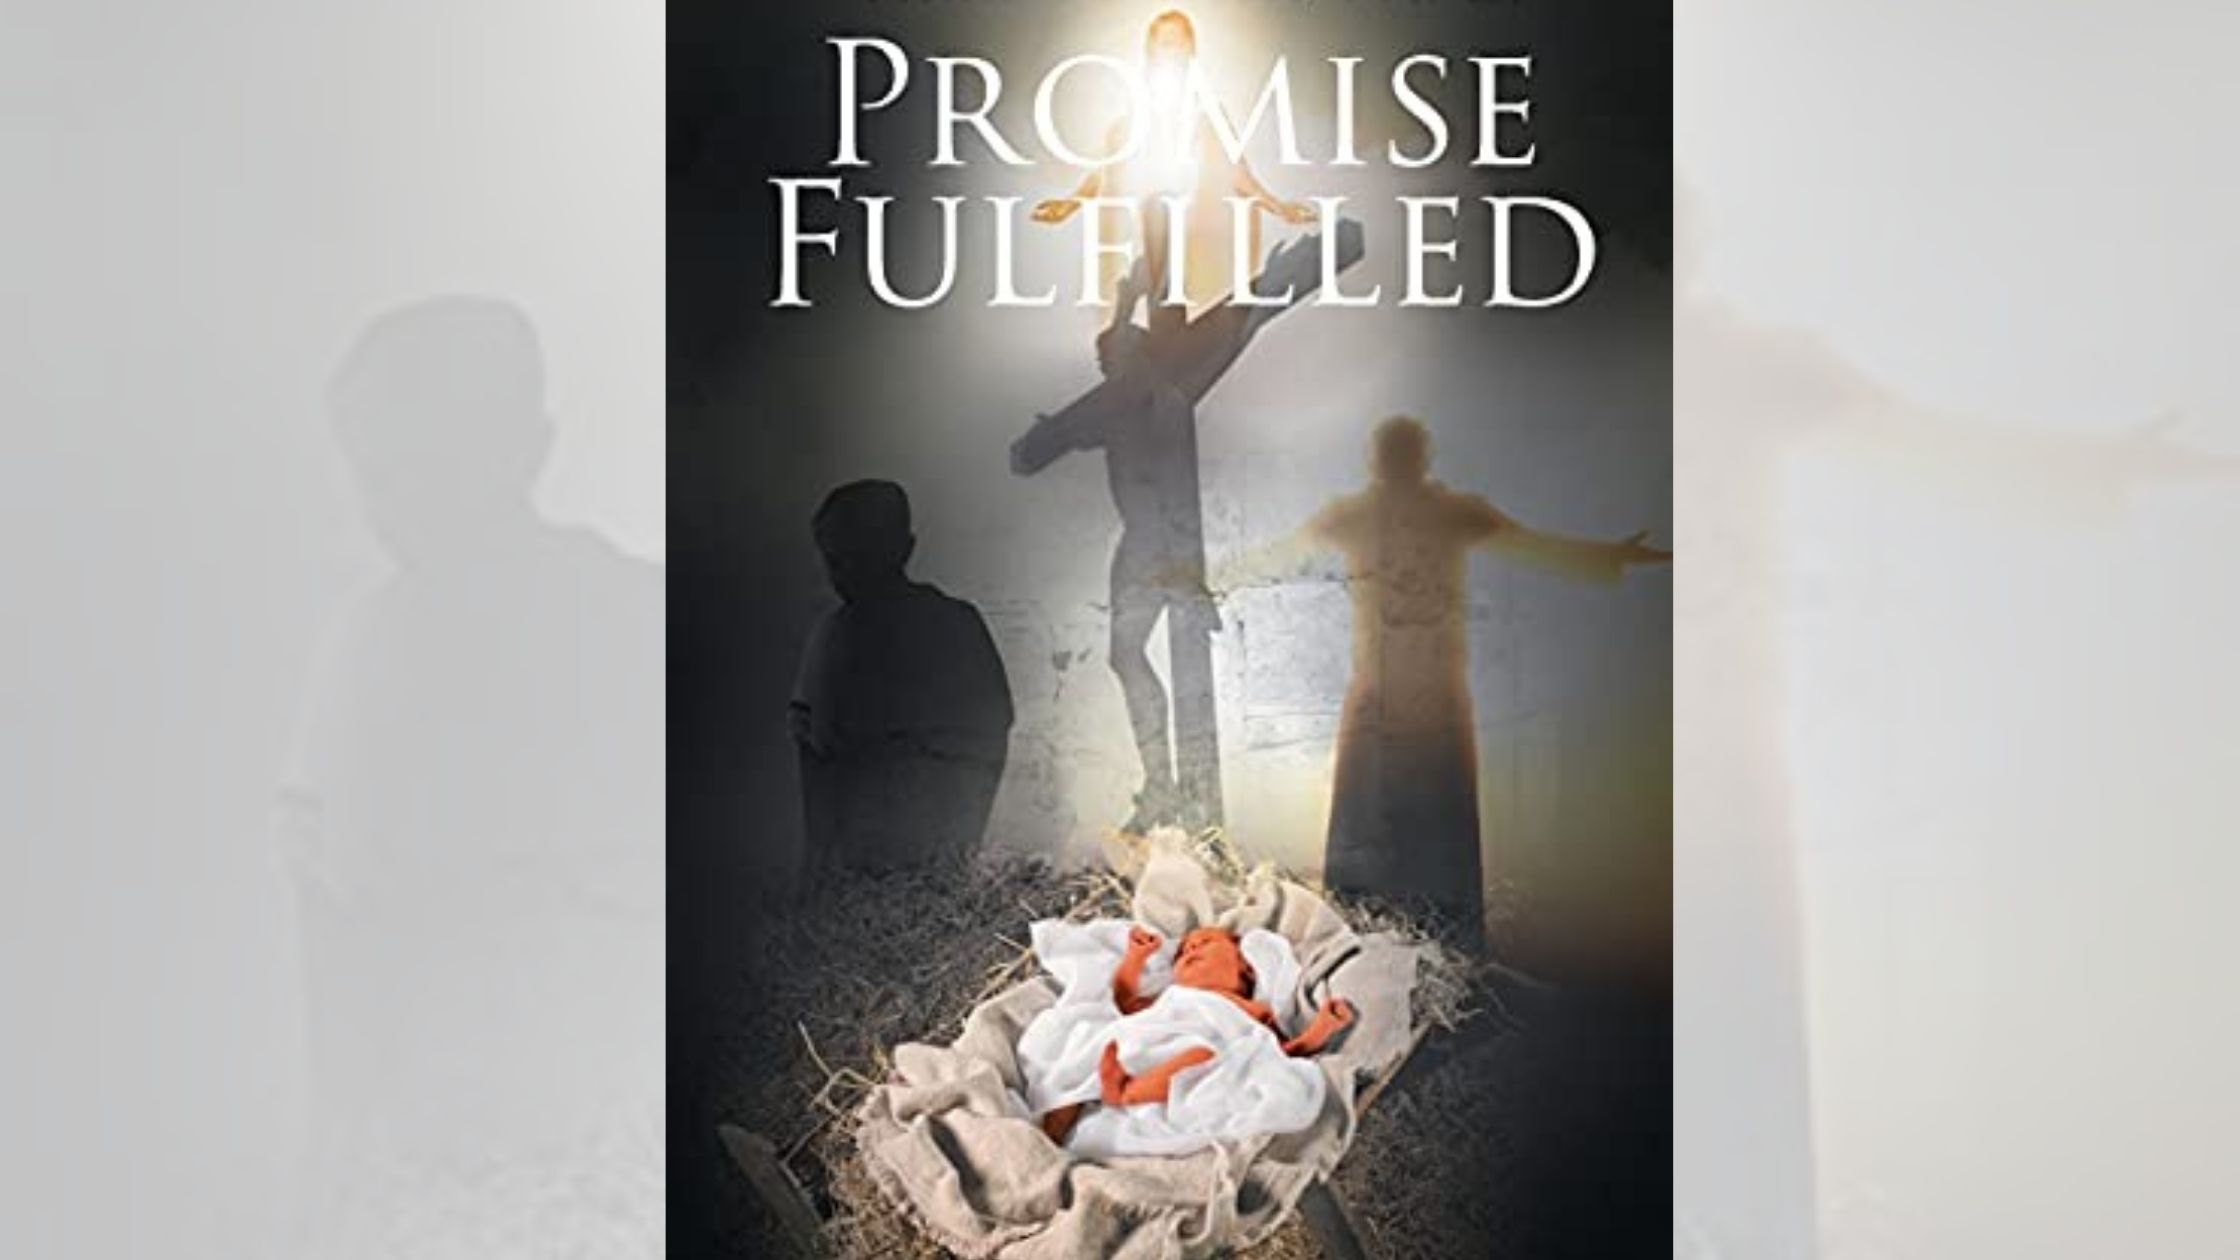 Author Fikre Tolossa, Ph.D.’s newly released “Promise Fulfilled” is a screenplay in verse about the life and teachings of Jesus Christ